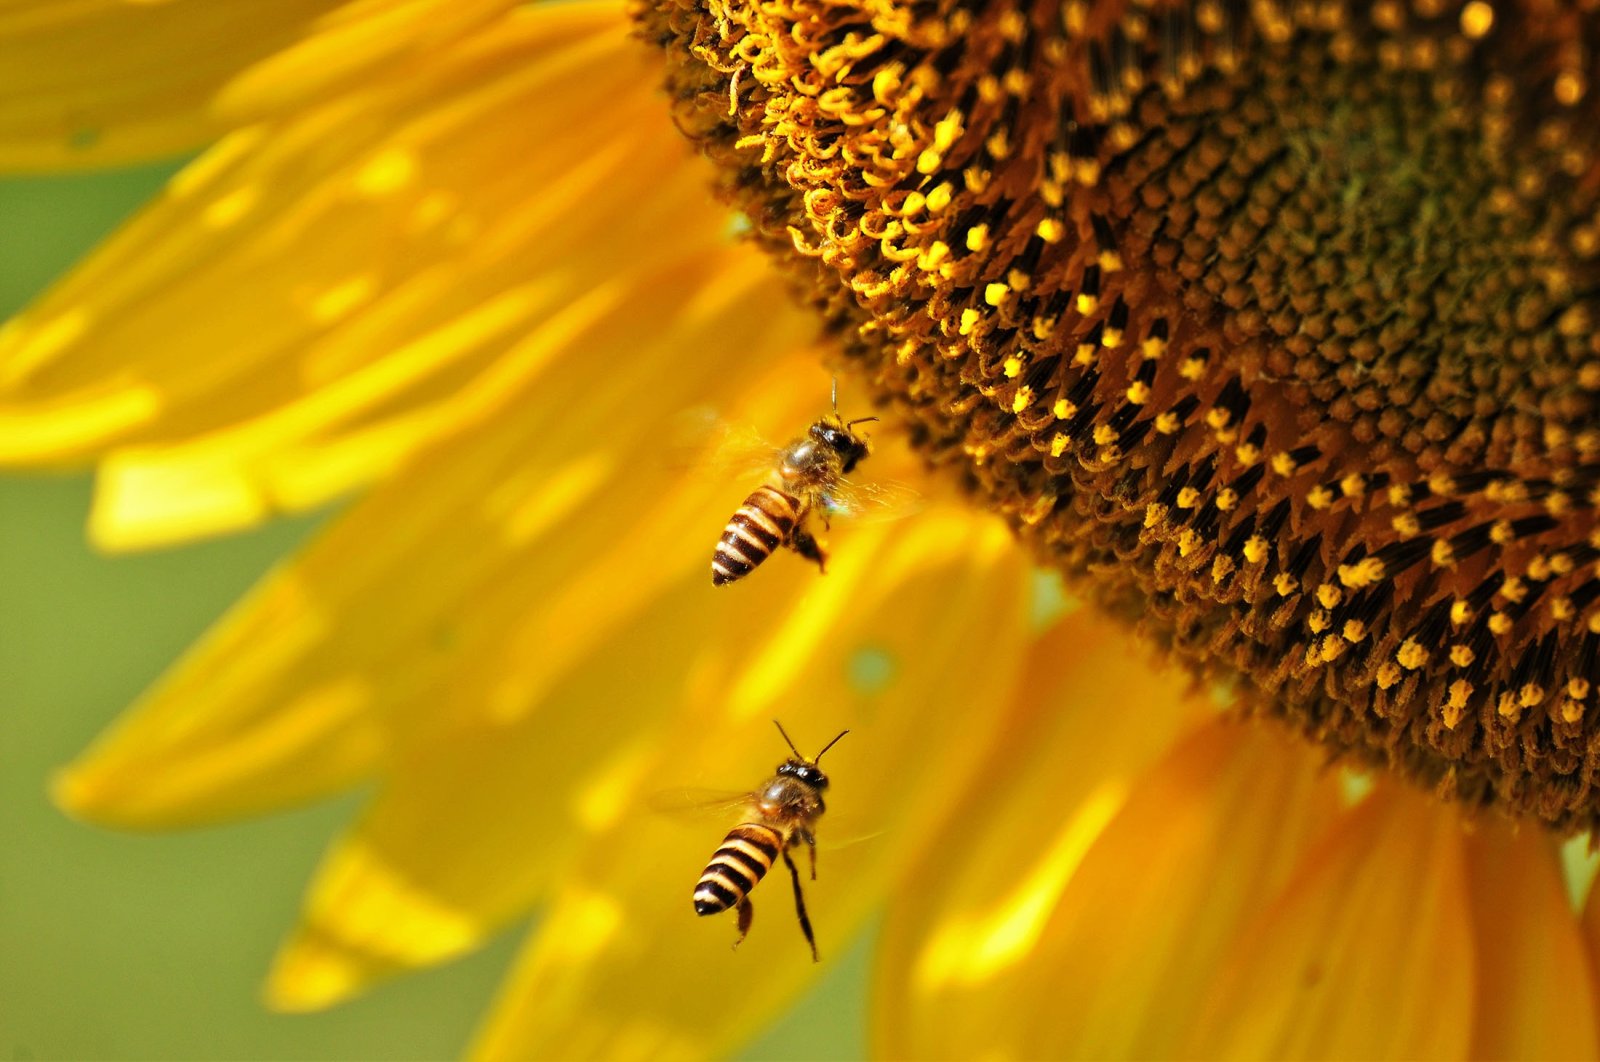 Most crops grown depend on insect pollination, the majority of which comes from bees. (Shutterstock Photo)